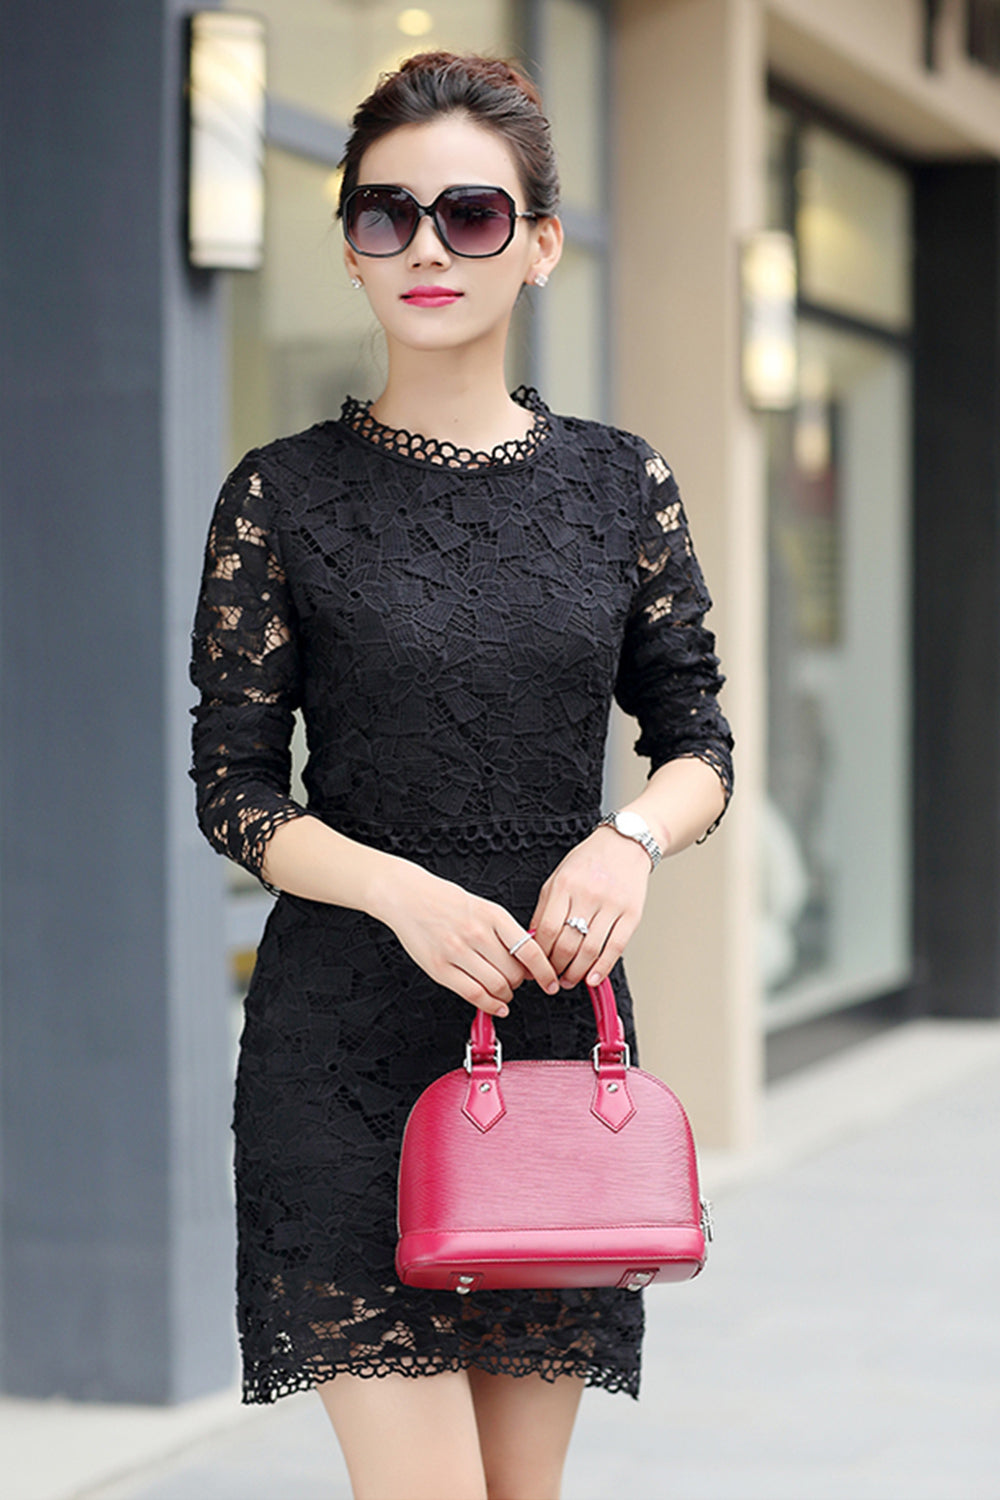 Ketty More Women Short Length Lace Decorated Shift Dress-KMWD409